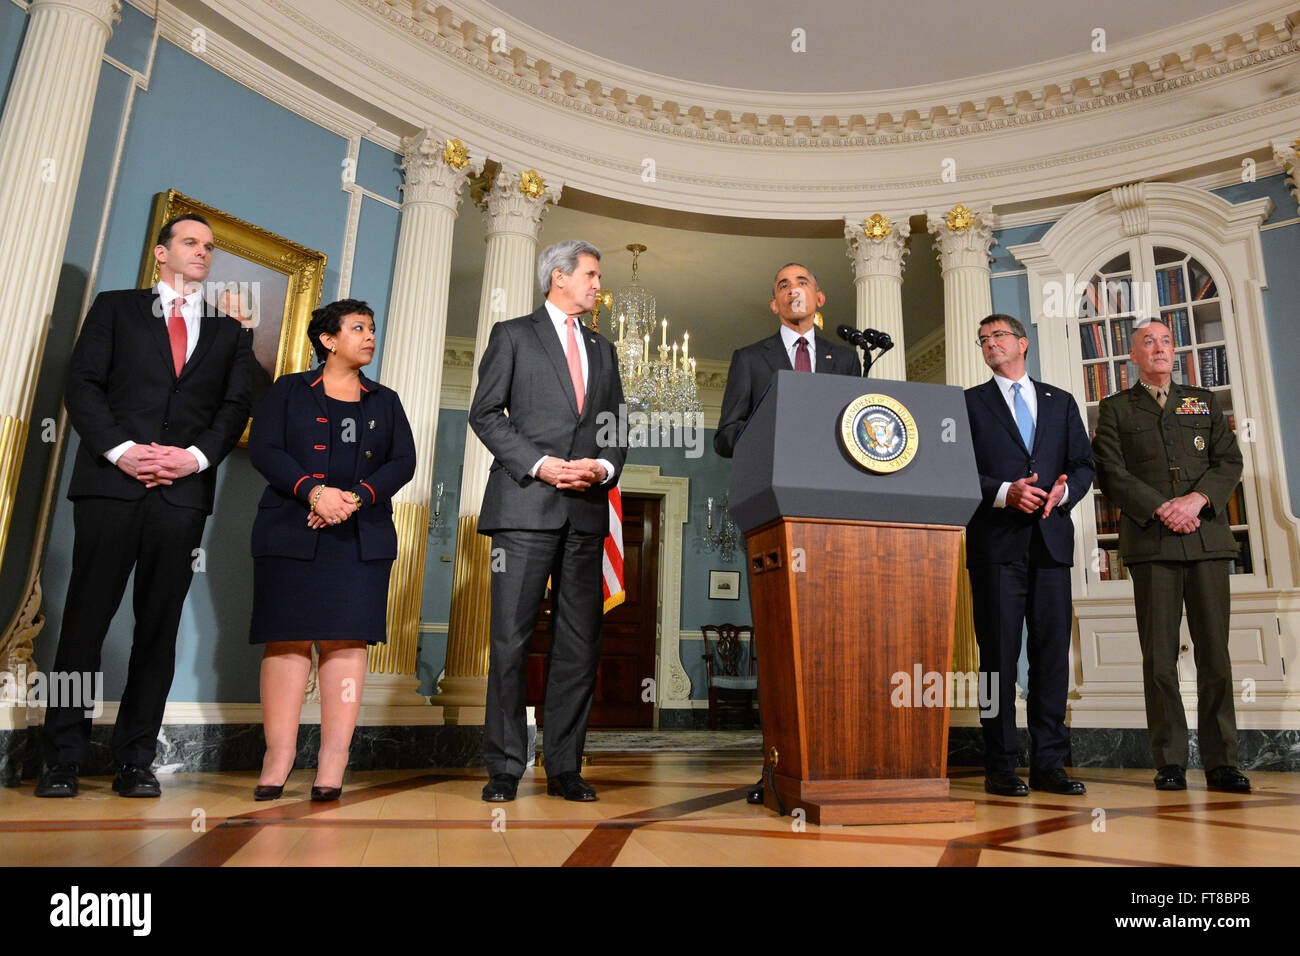 President Barack Obama, with (left to right) Special Presidential Envoy for the Global Coalition to Counter ISIL Brett McGurk, Attorney General Loretta Lynch, U.S. Secretary of State John Kerry, U.S. Secretary of Defense Ash Carter, and Chairman of the Joint Chiefs of Staff Joseph Dunford, delivers a statement on the global campaign to degrade and destroy ISIL, as well as Syria and other regional issues, at the U.S. Department of State in Washington, D.C., on February 25, 2016. [State Department photo/ Public Domain] Stock Photo